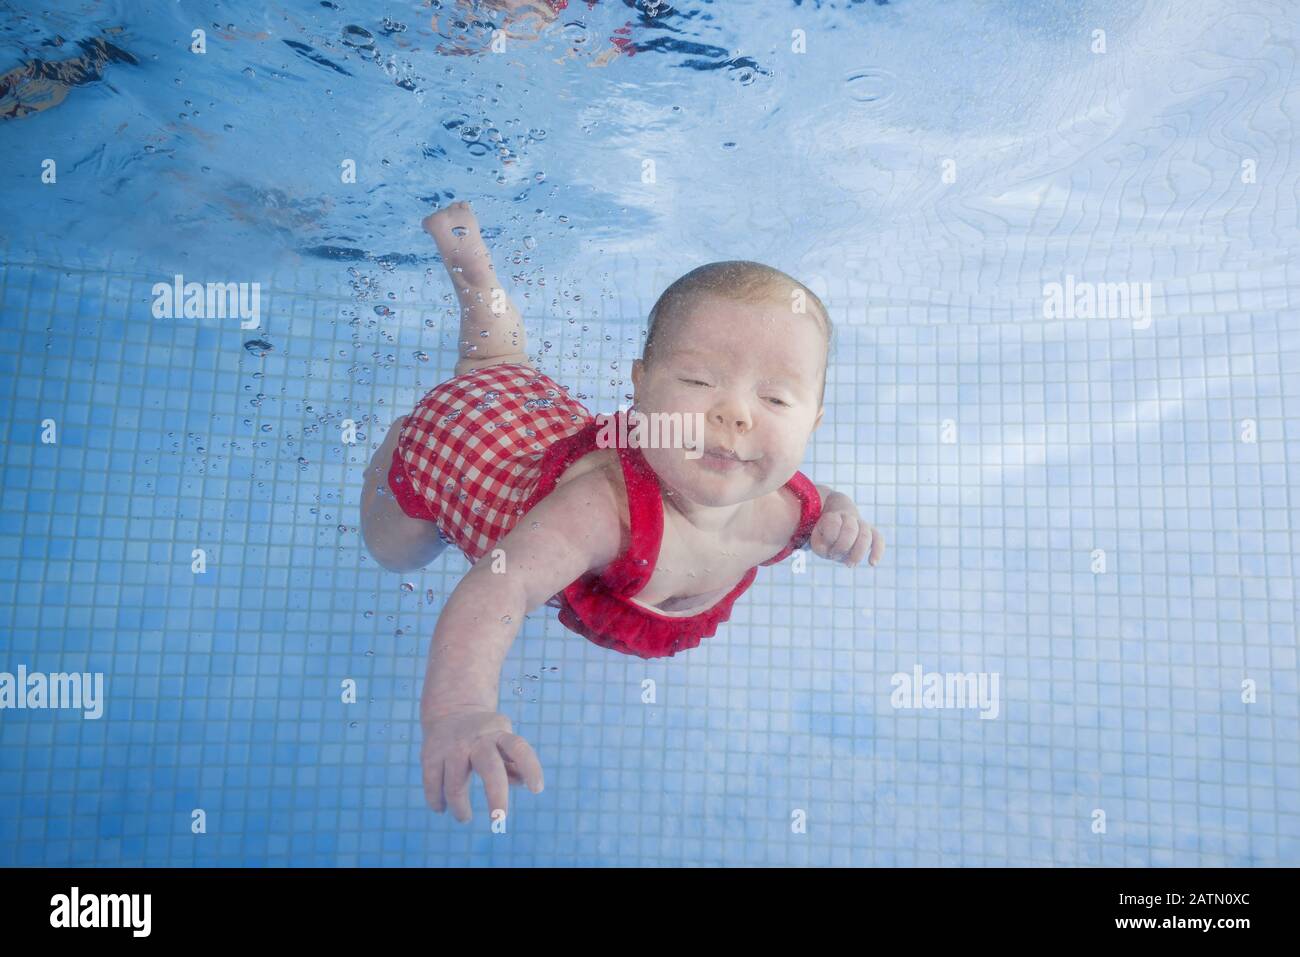 Newborn girl in a red swimsuit learns to dive in a swimming pool Stock Photo